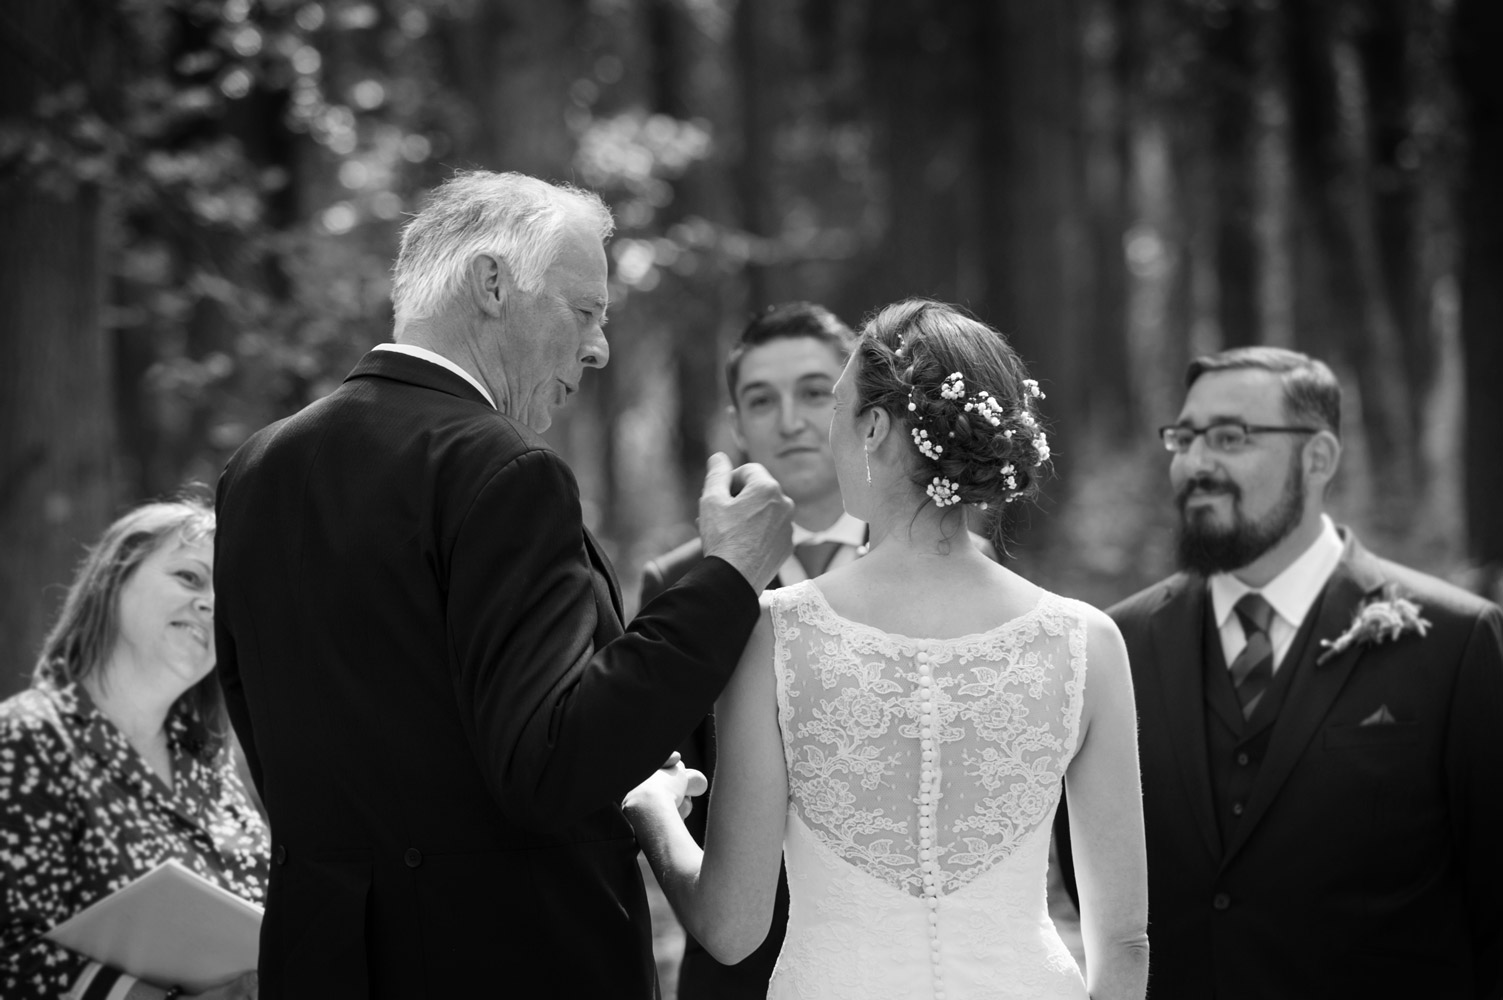 Father about to give away bride